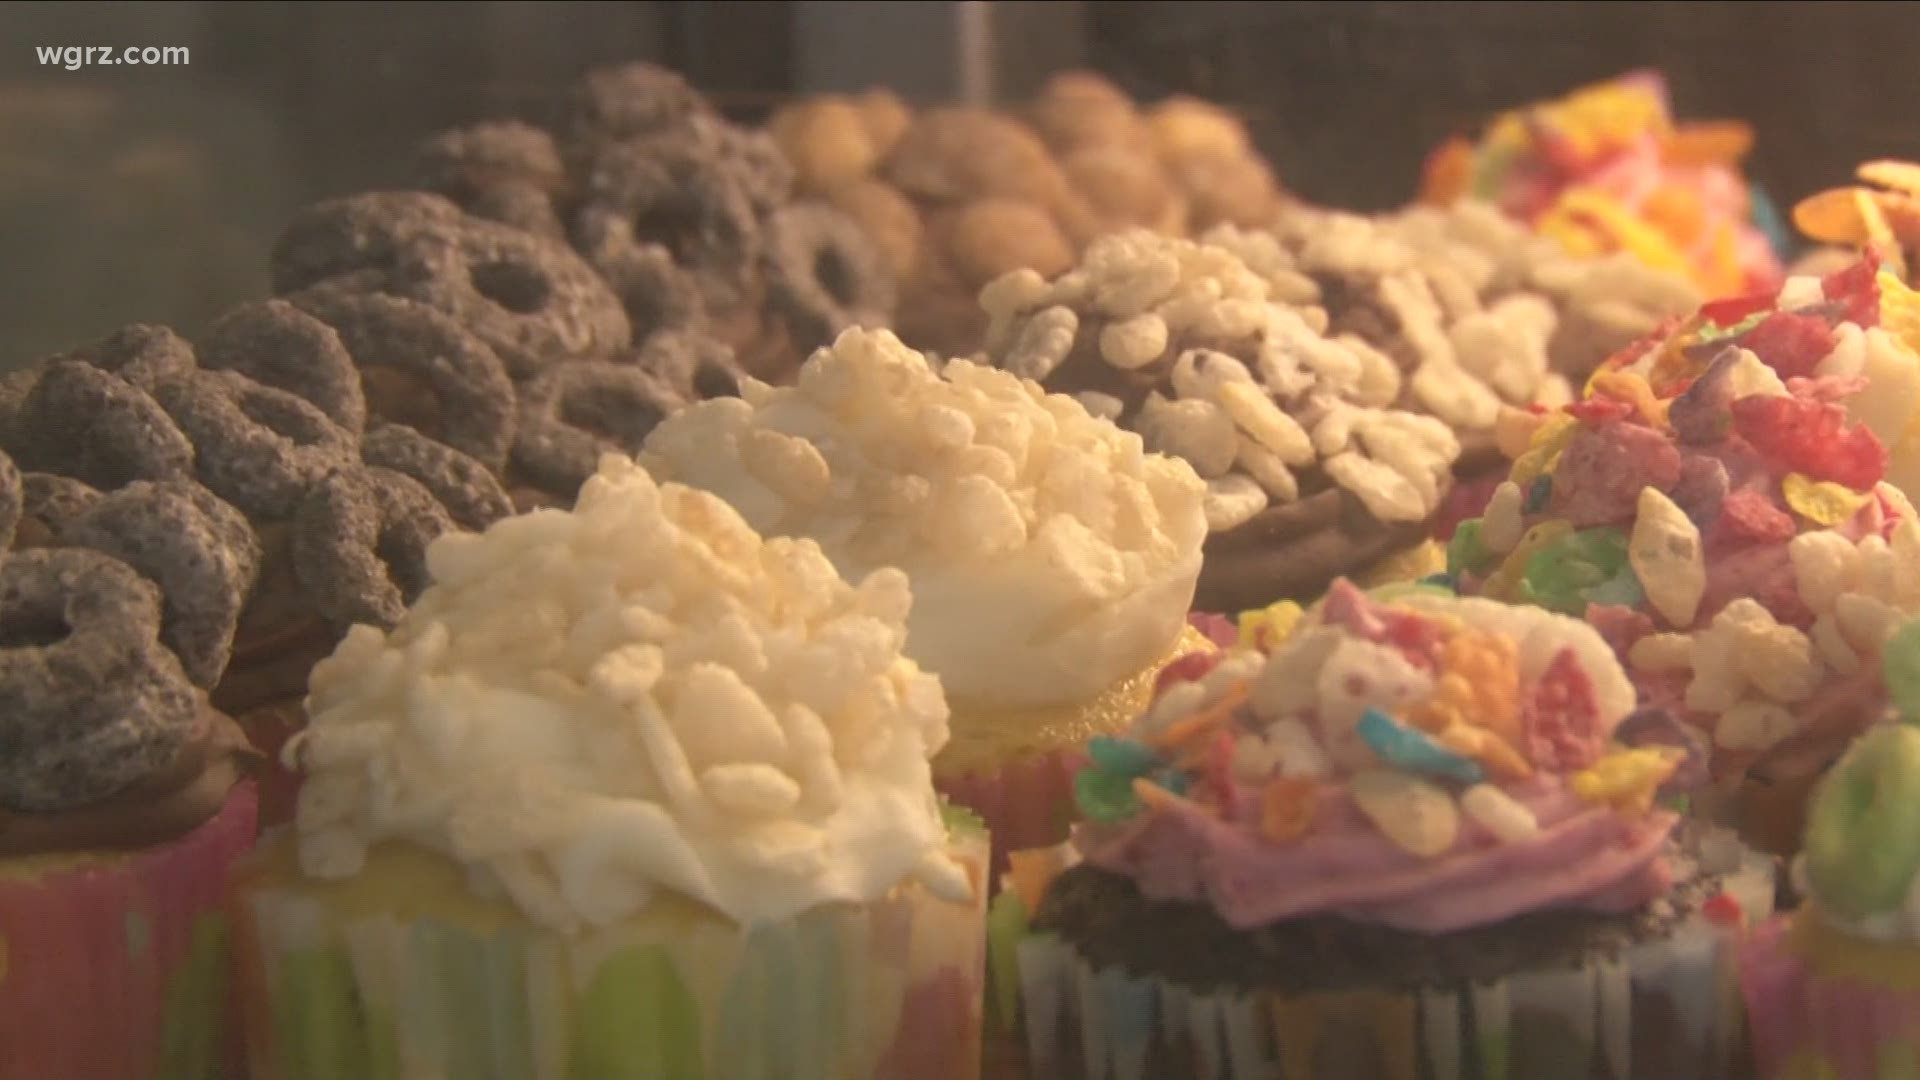 12-year-old Nina Conta started baking as a pandemic activity, and now she's selling her sweet treats in a Buffalo storefront!